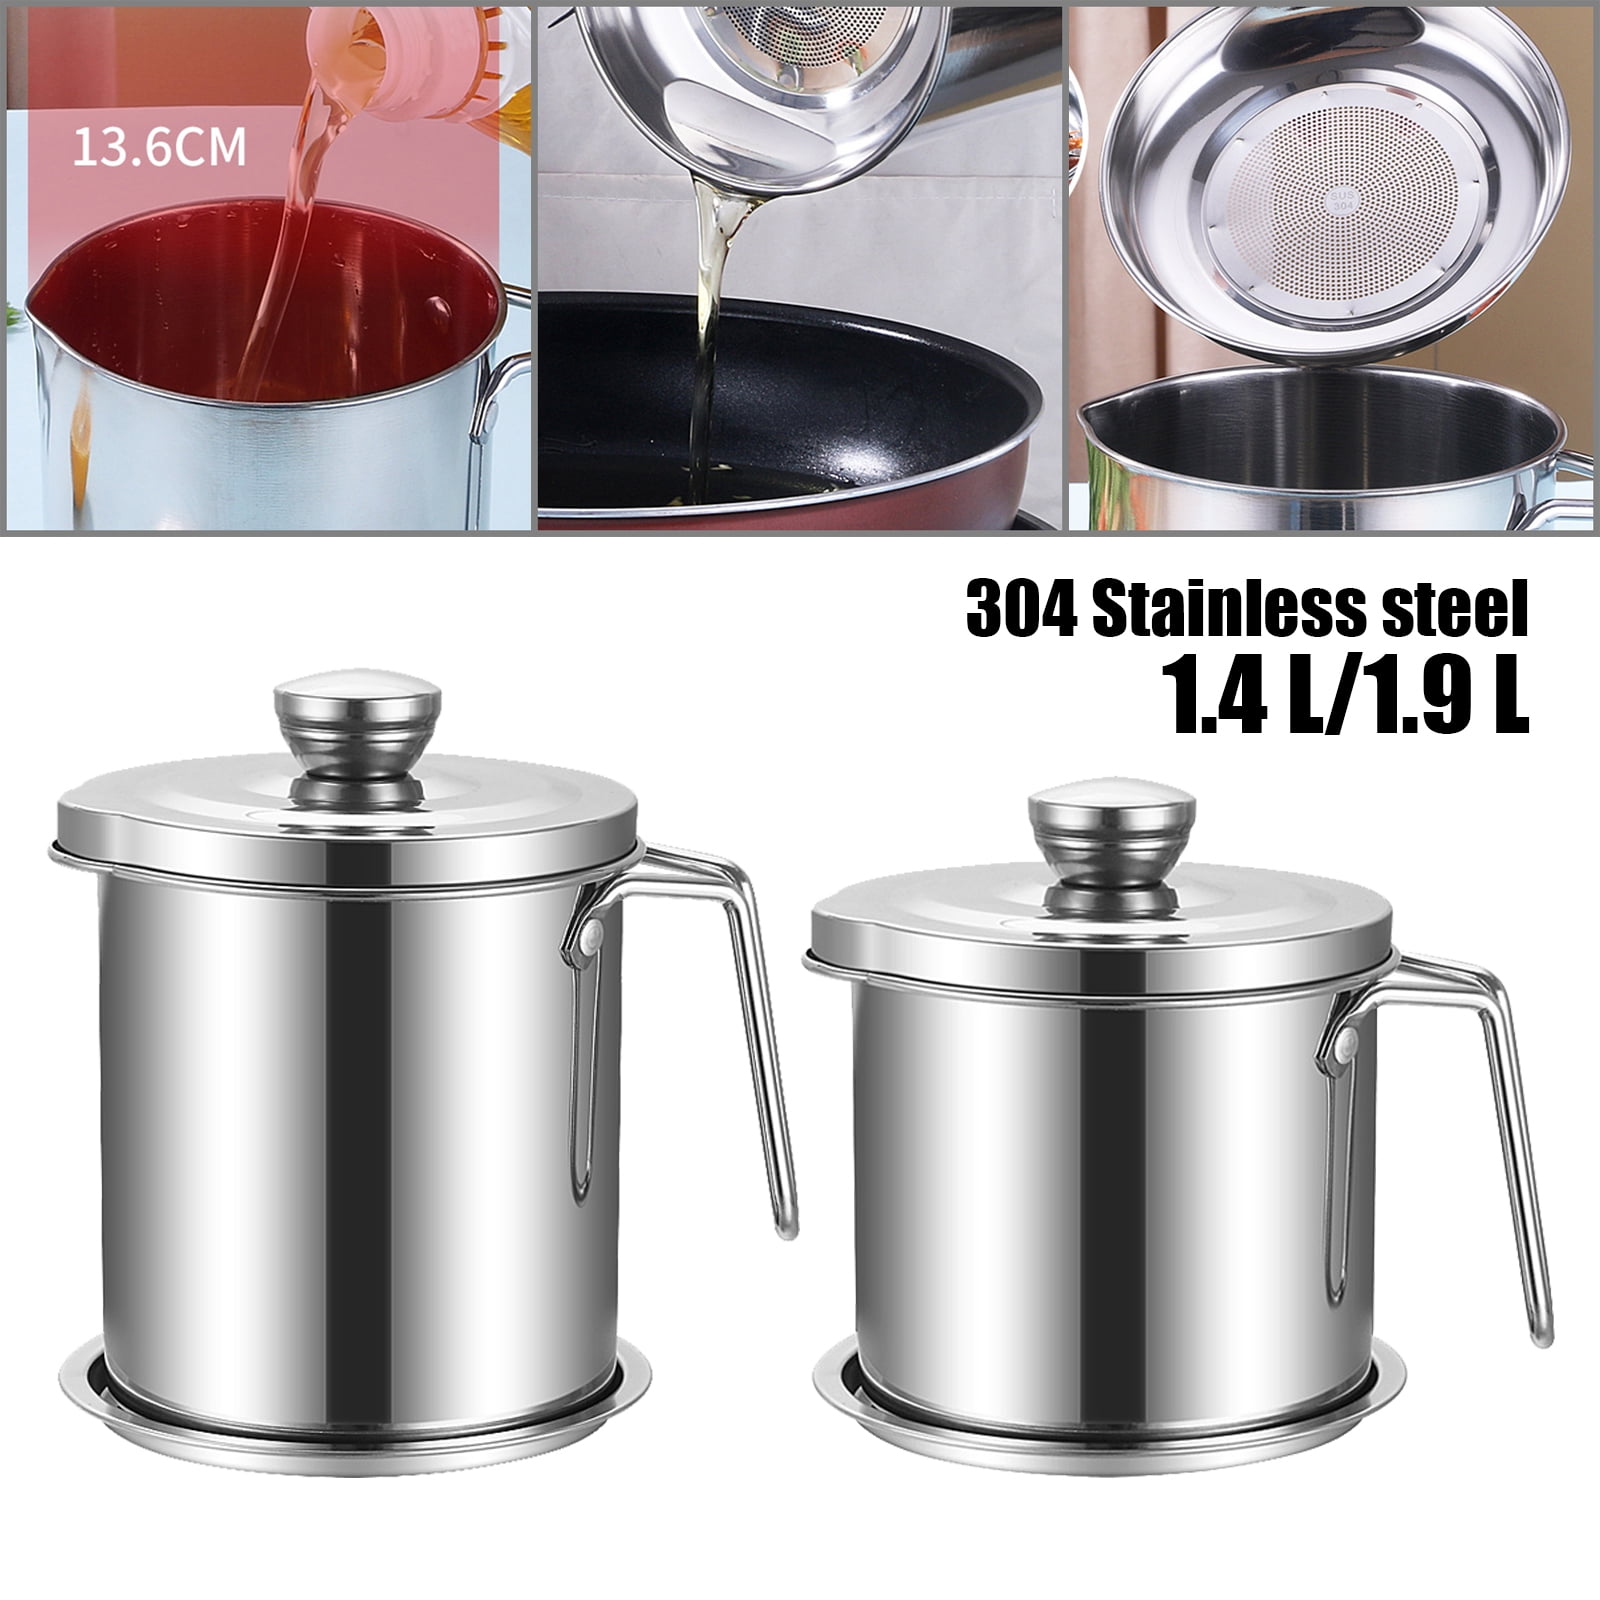 Cook N Home 02651 Stainless Steel Oil Grease Storage Can with Strainer, 3.5 Quarts, Silver